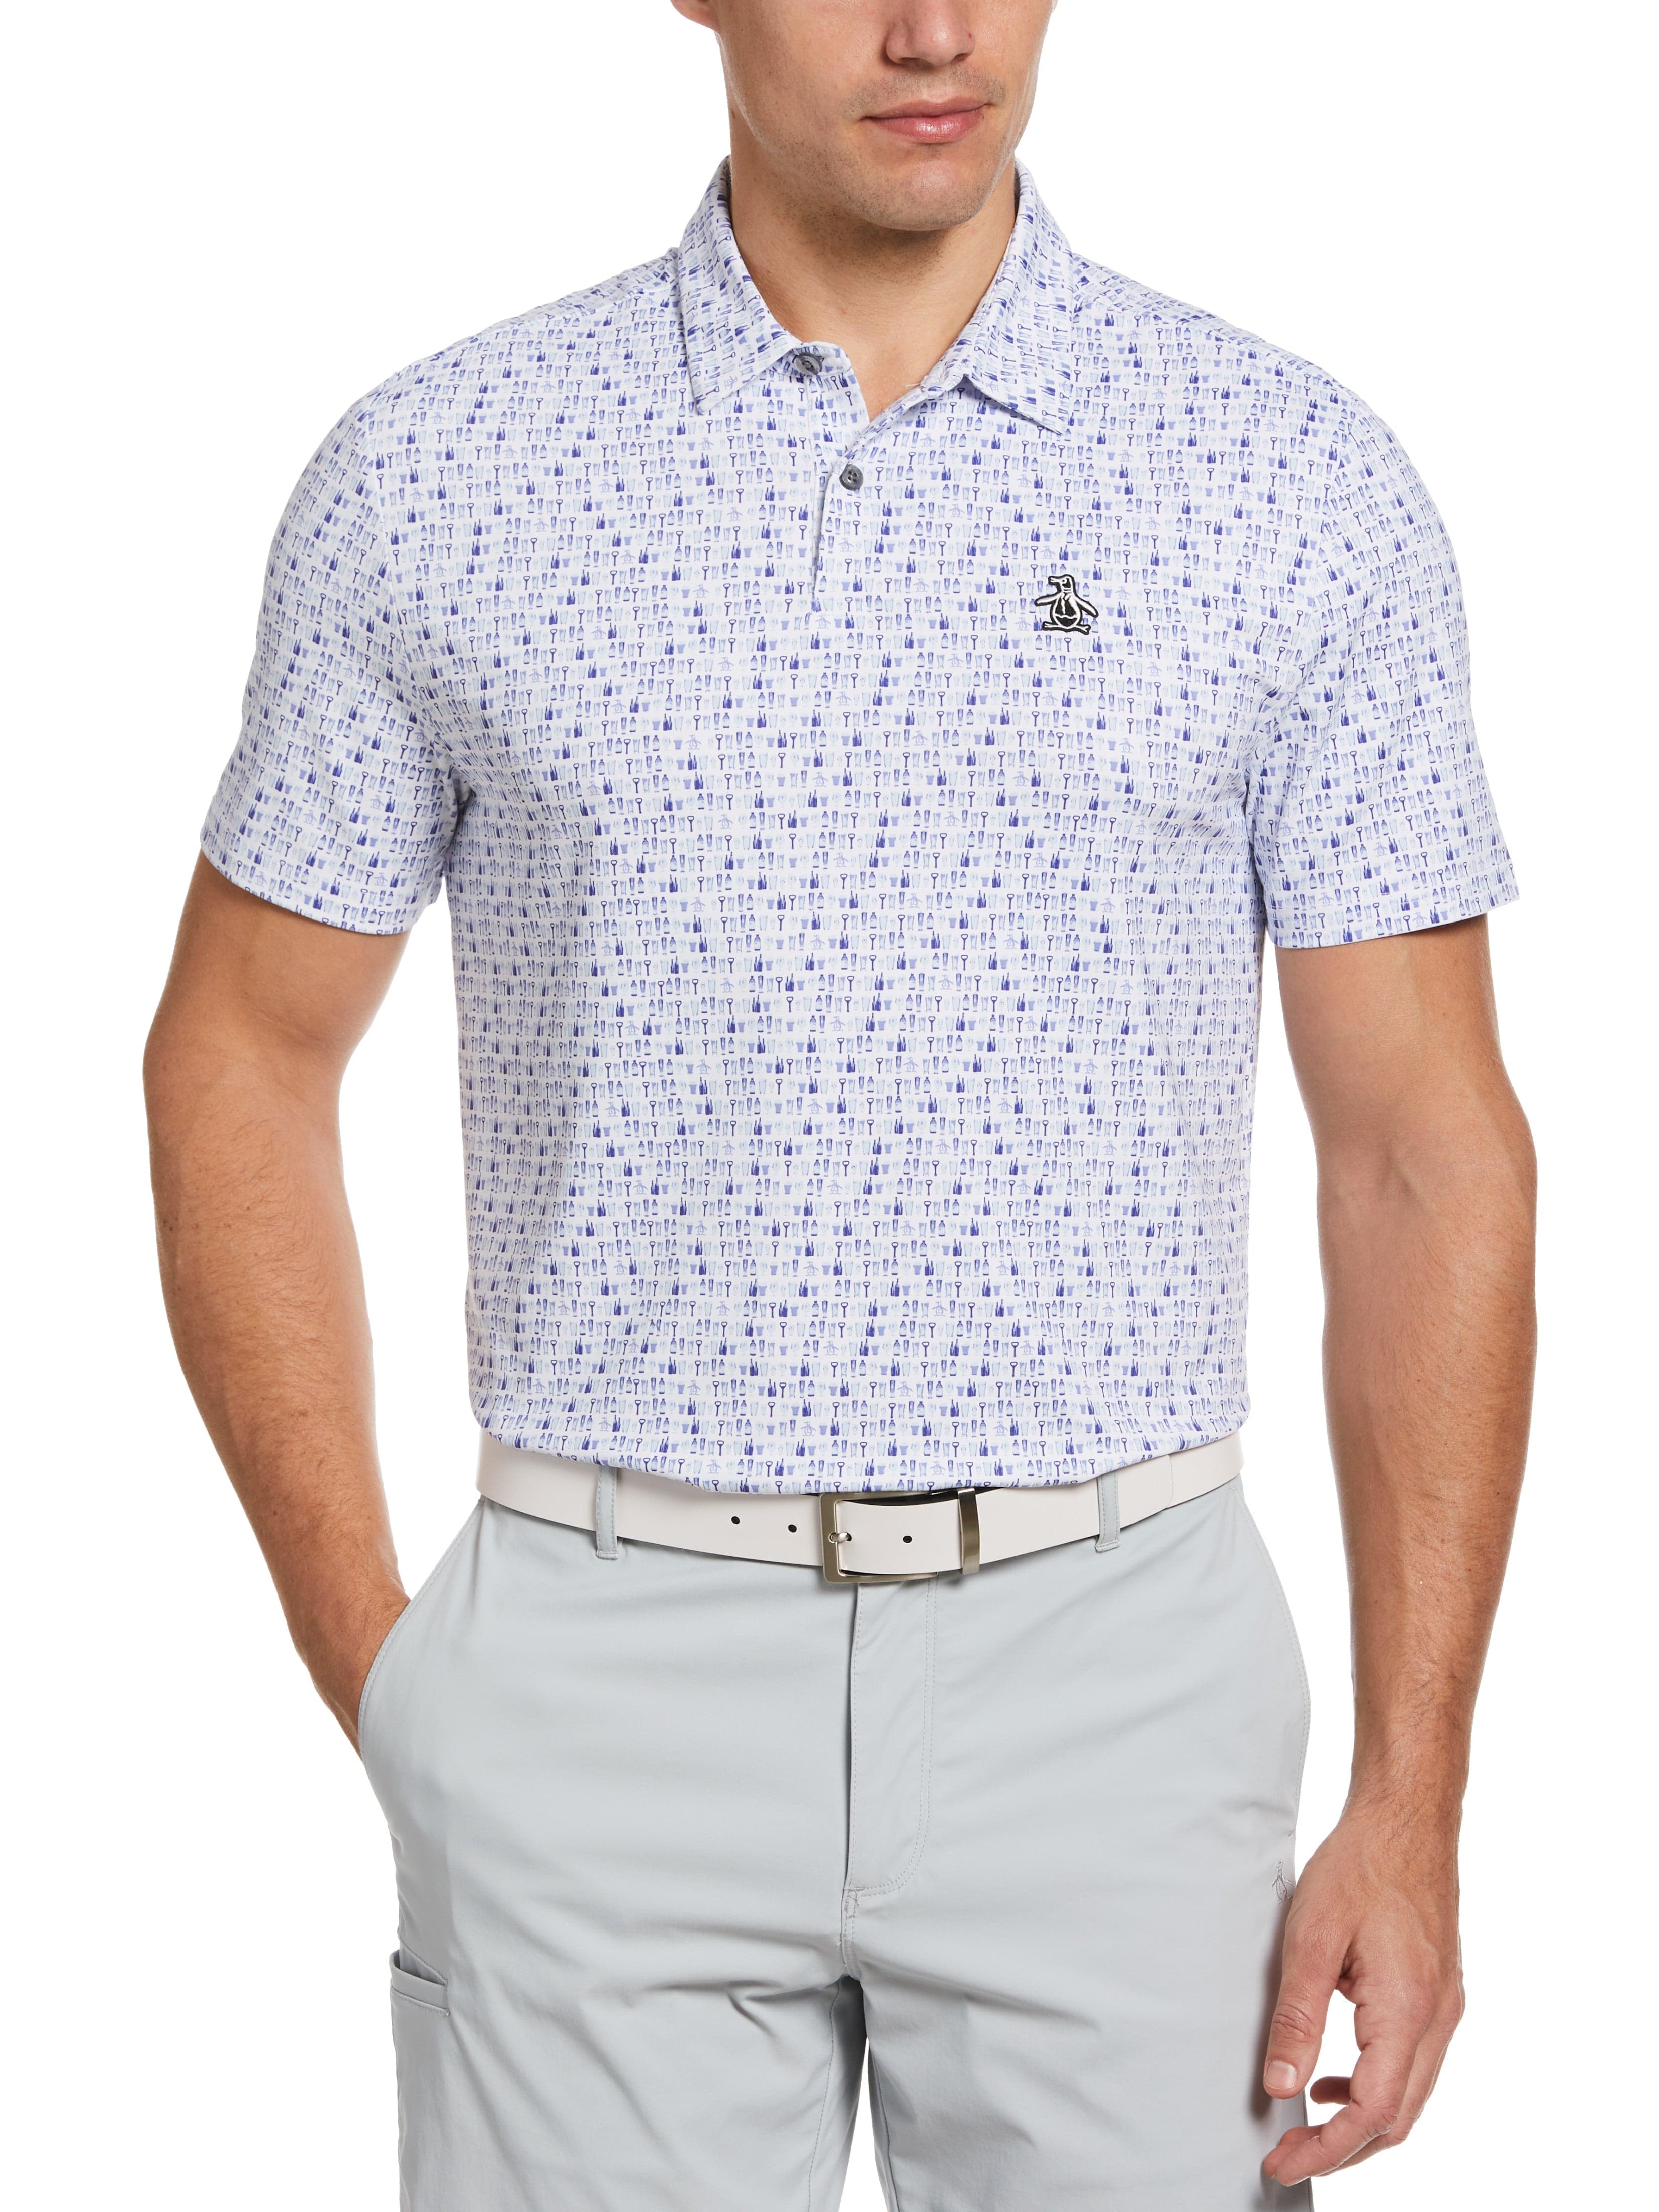 Original Penguin Mens Have a Beer Novelty Print Golf Polo Shirt, Size Medium, Blueing, Polyester/Recycled Polyester/Elastane | Golf Apparel Shop